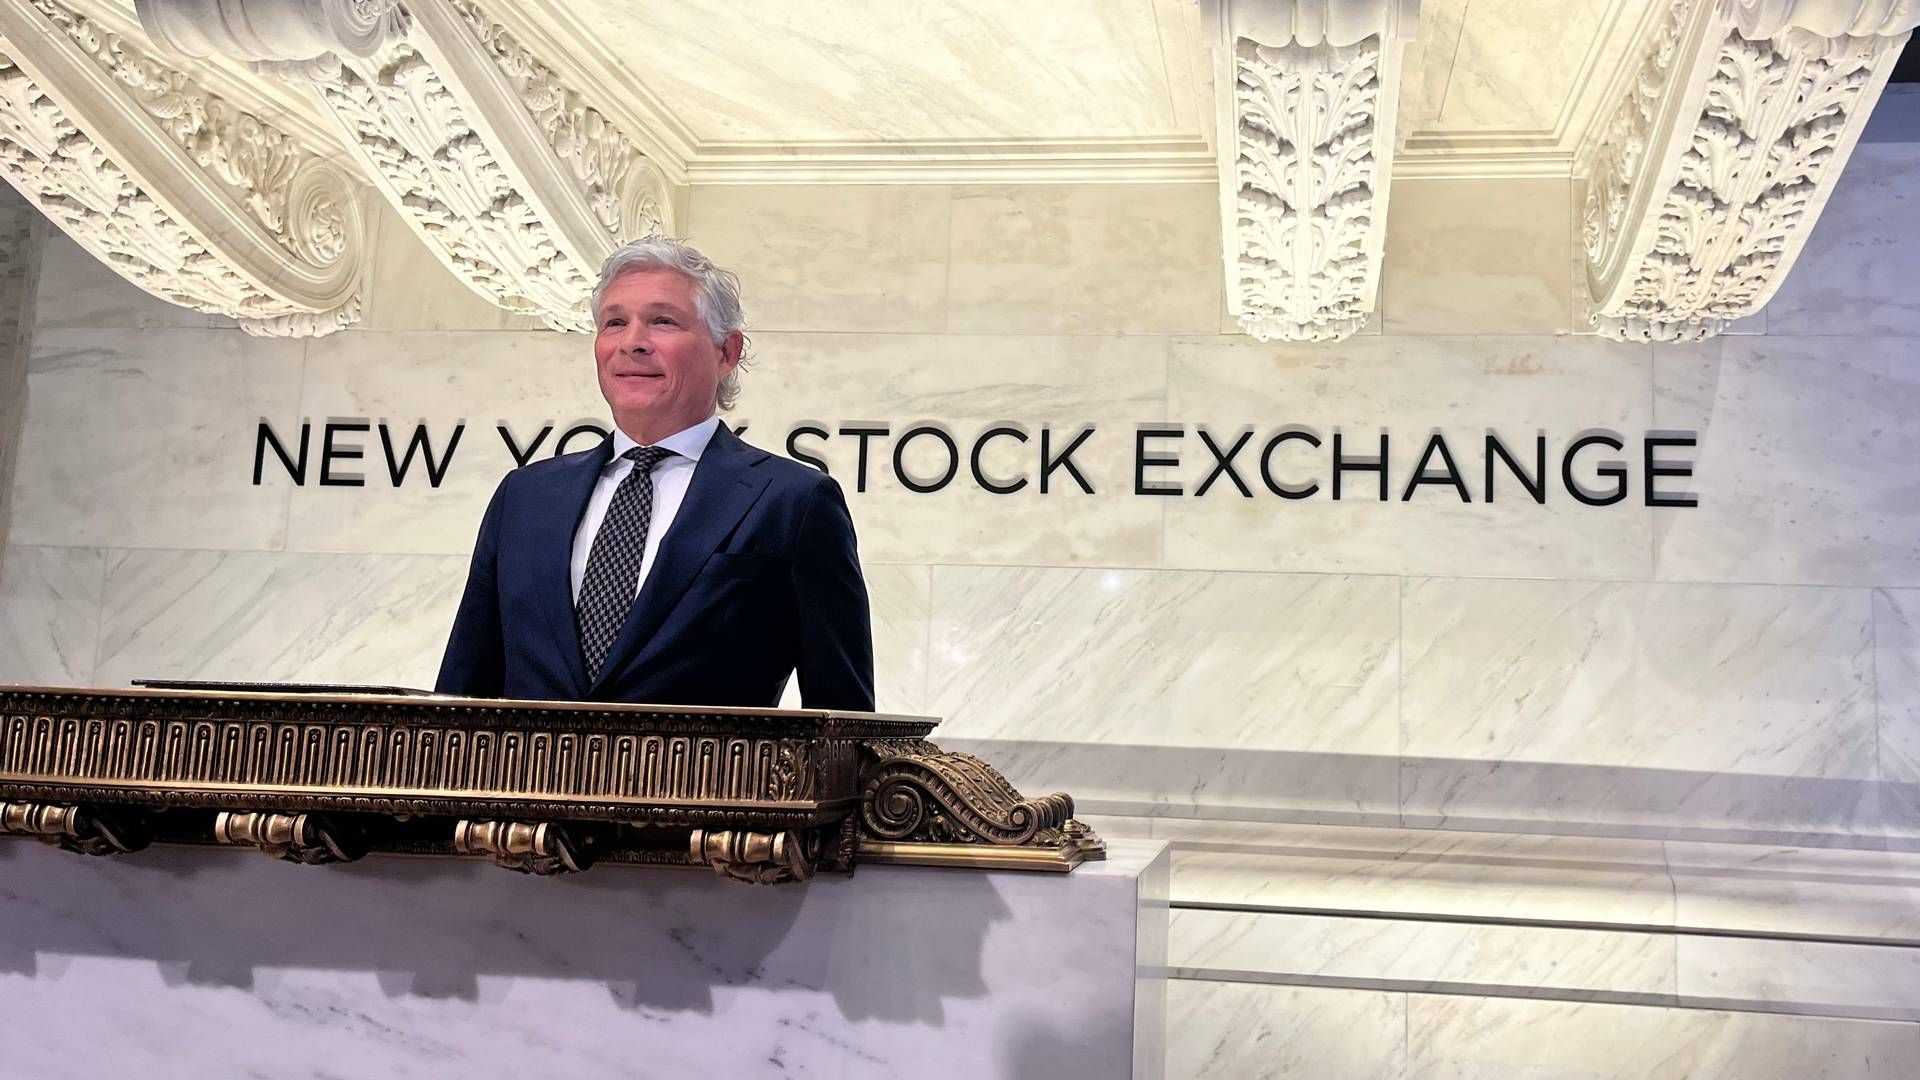 Mikael Skov, founder and CEO of Hafnia, rang the bell at the New York Stock Exchange on Tuesday to mark the opening of trading with the tanker operator's shares. | Photo: Af Sofie Højlund